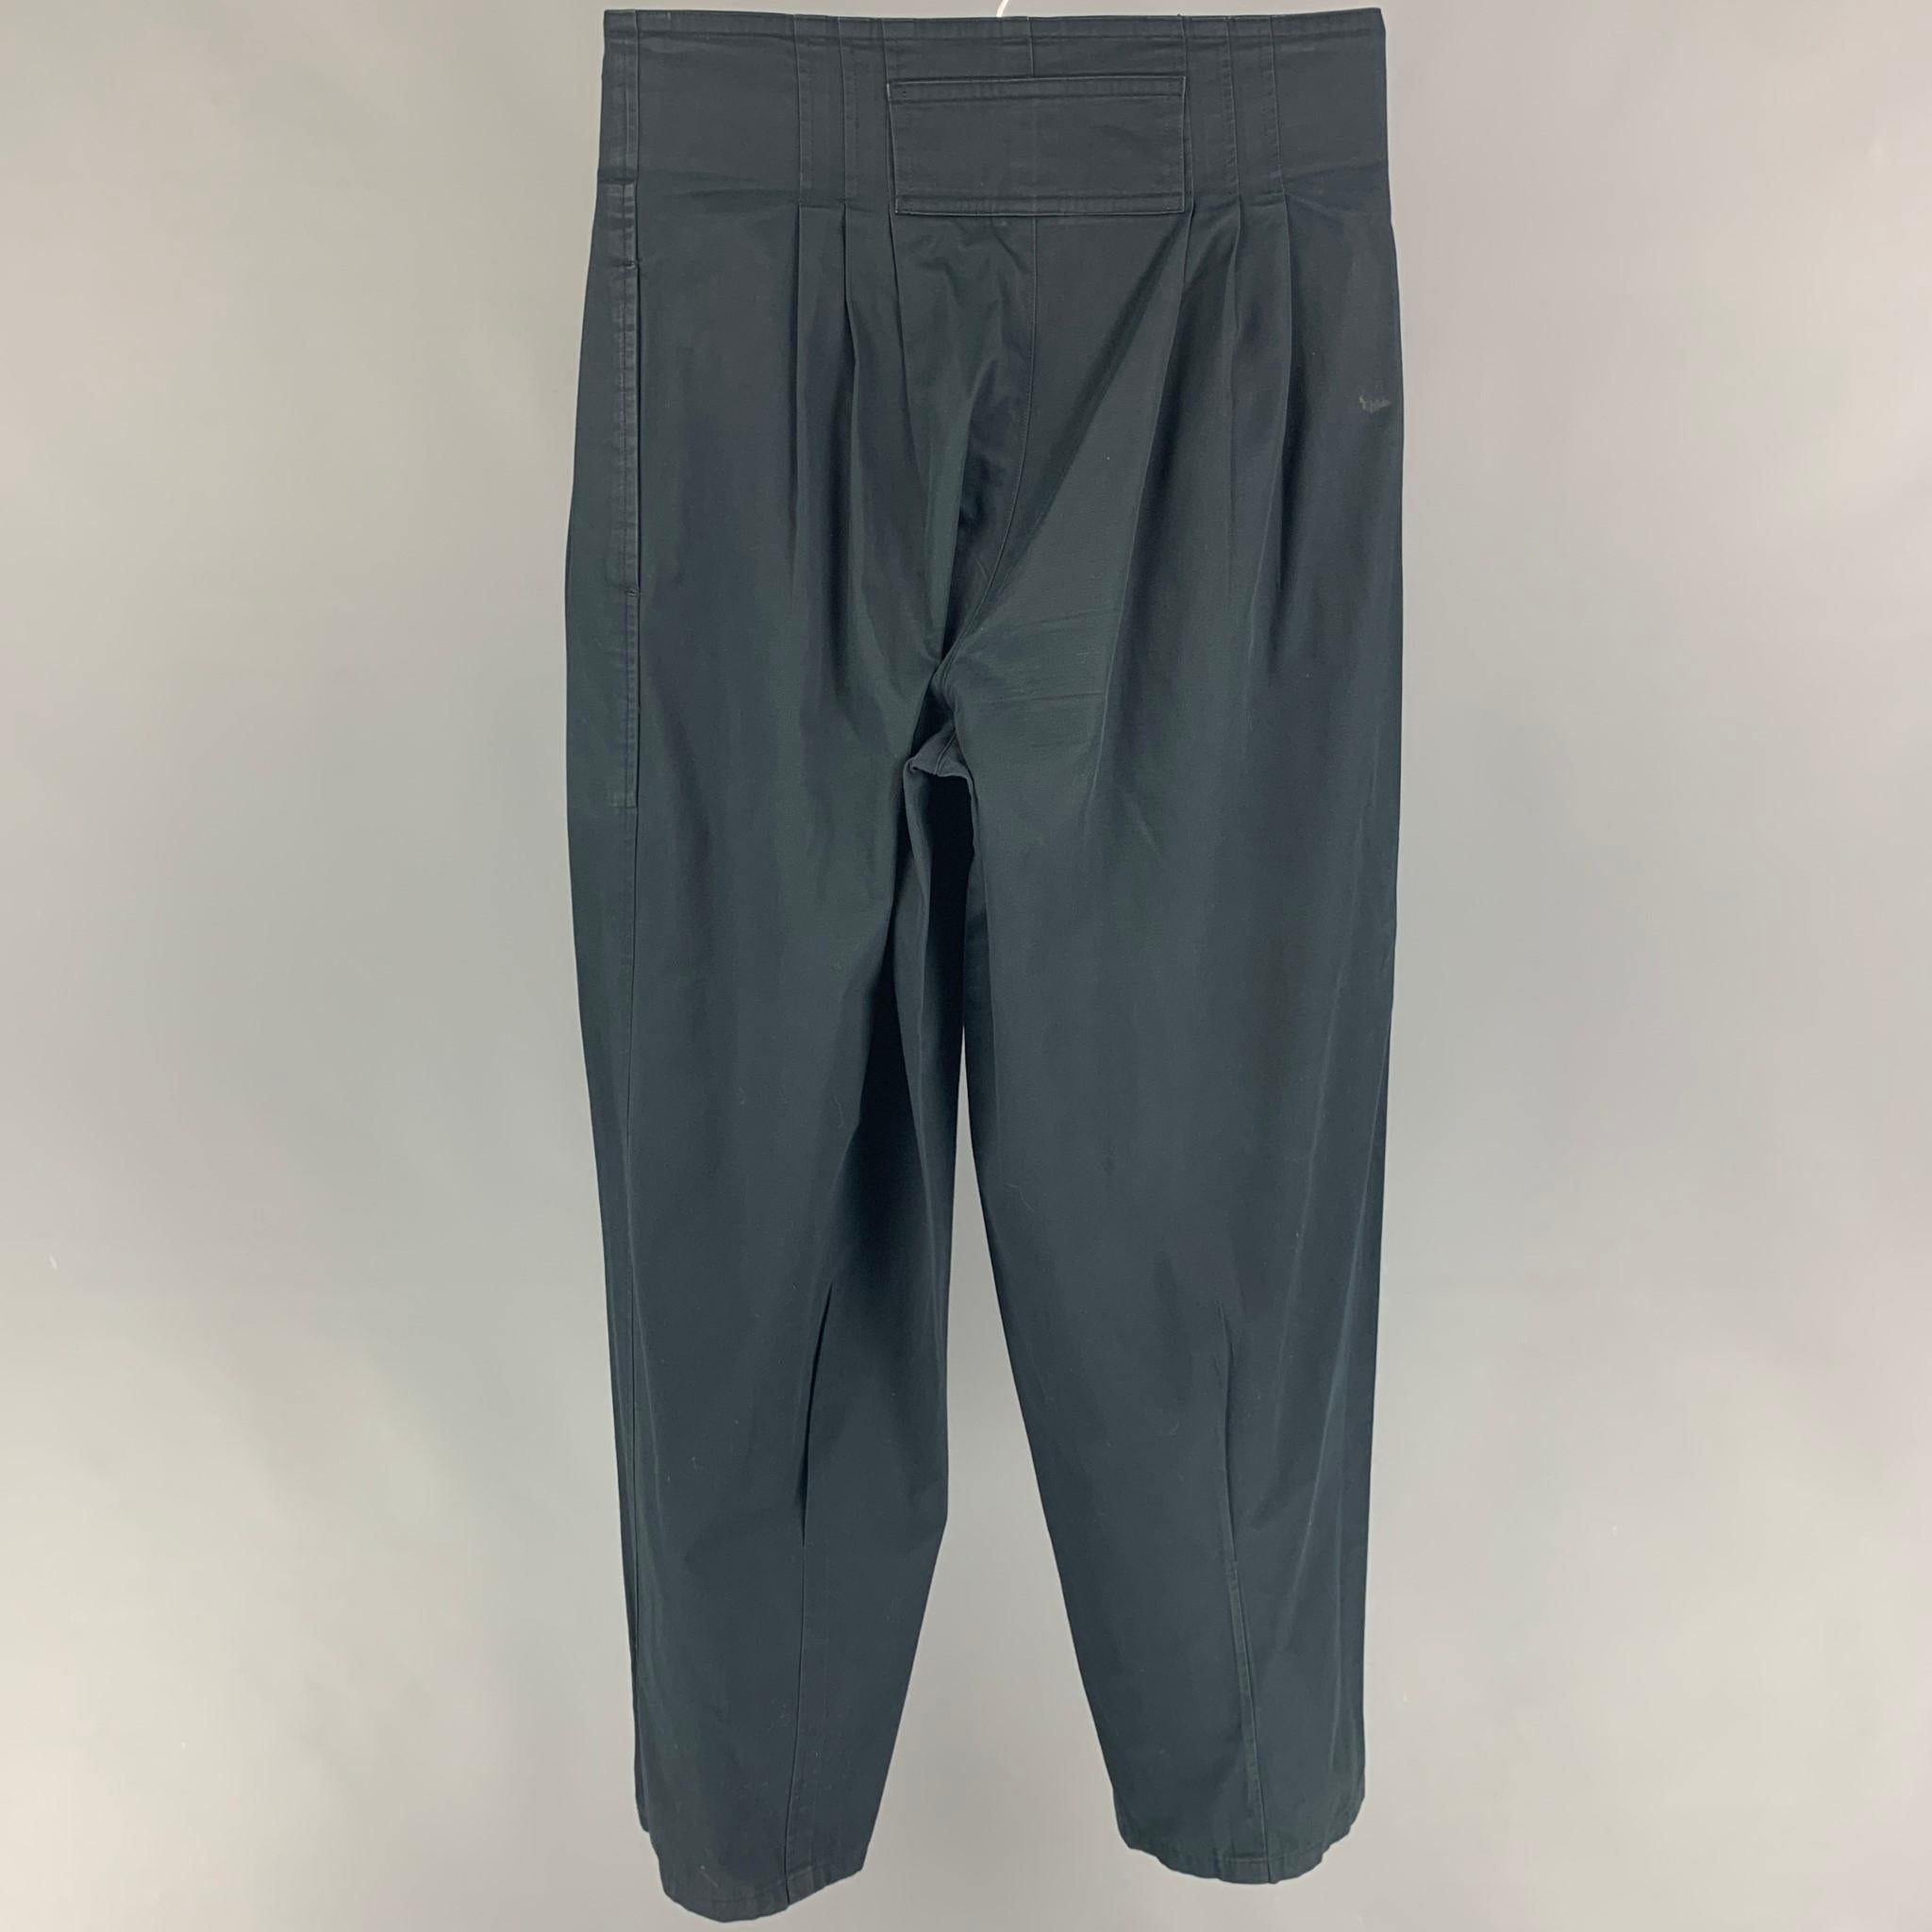 Vintage KANSAI MEN pants comes in a black cotton featuring a high waisted style, pleated, asymmetrical, and a zip fly closure. Made in Japan. 

Very Good Pre-Owned Condition.
Marked: Size tag removed.

Measurements:

Waist: 28 in.
Rise: 13